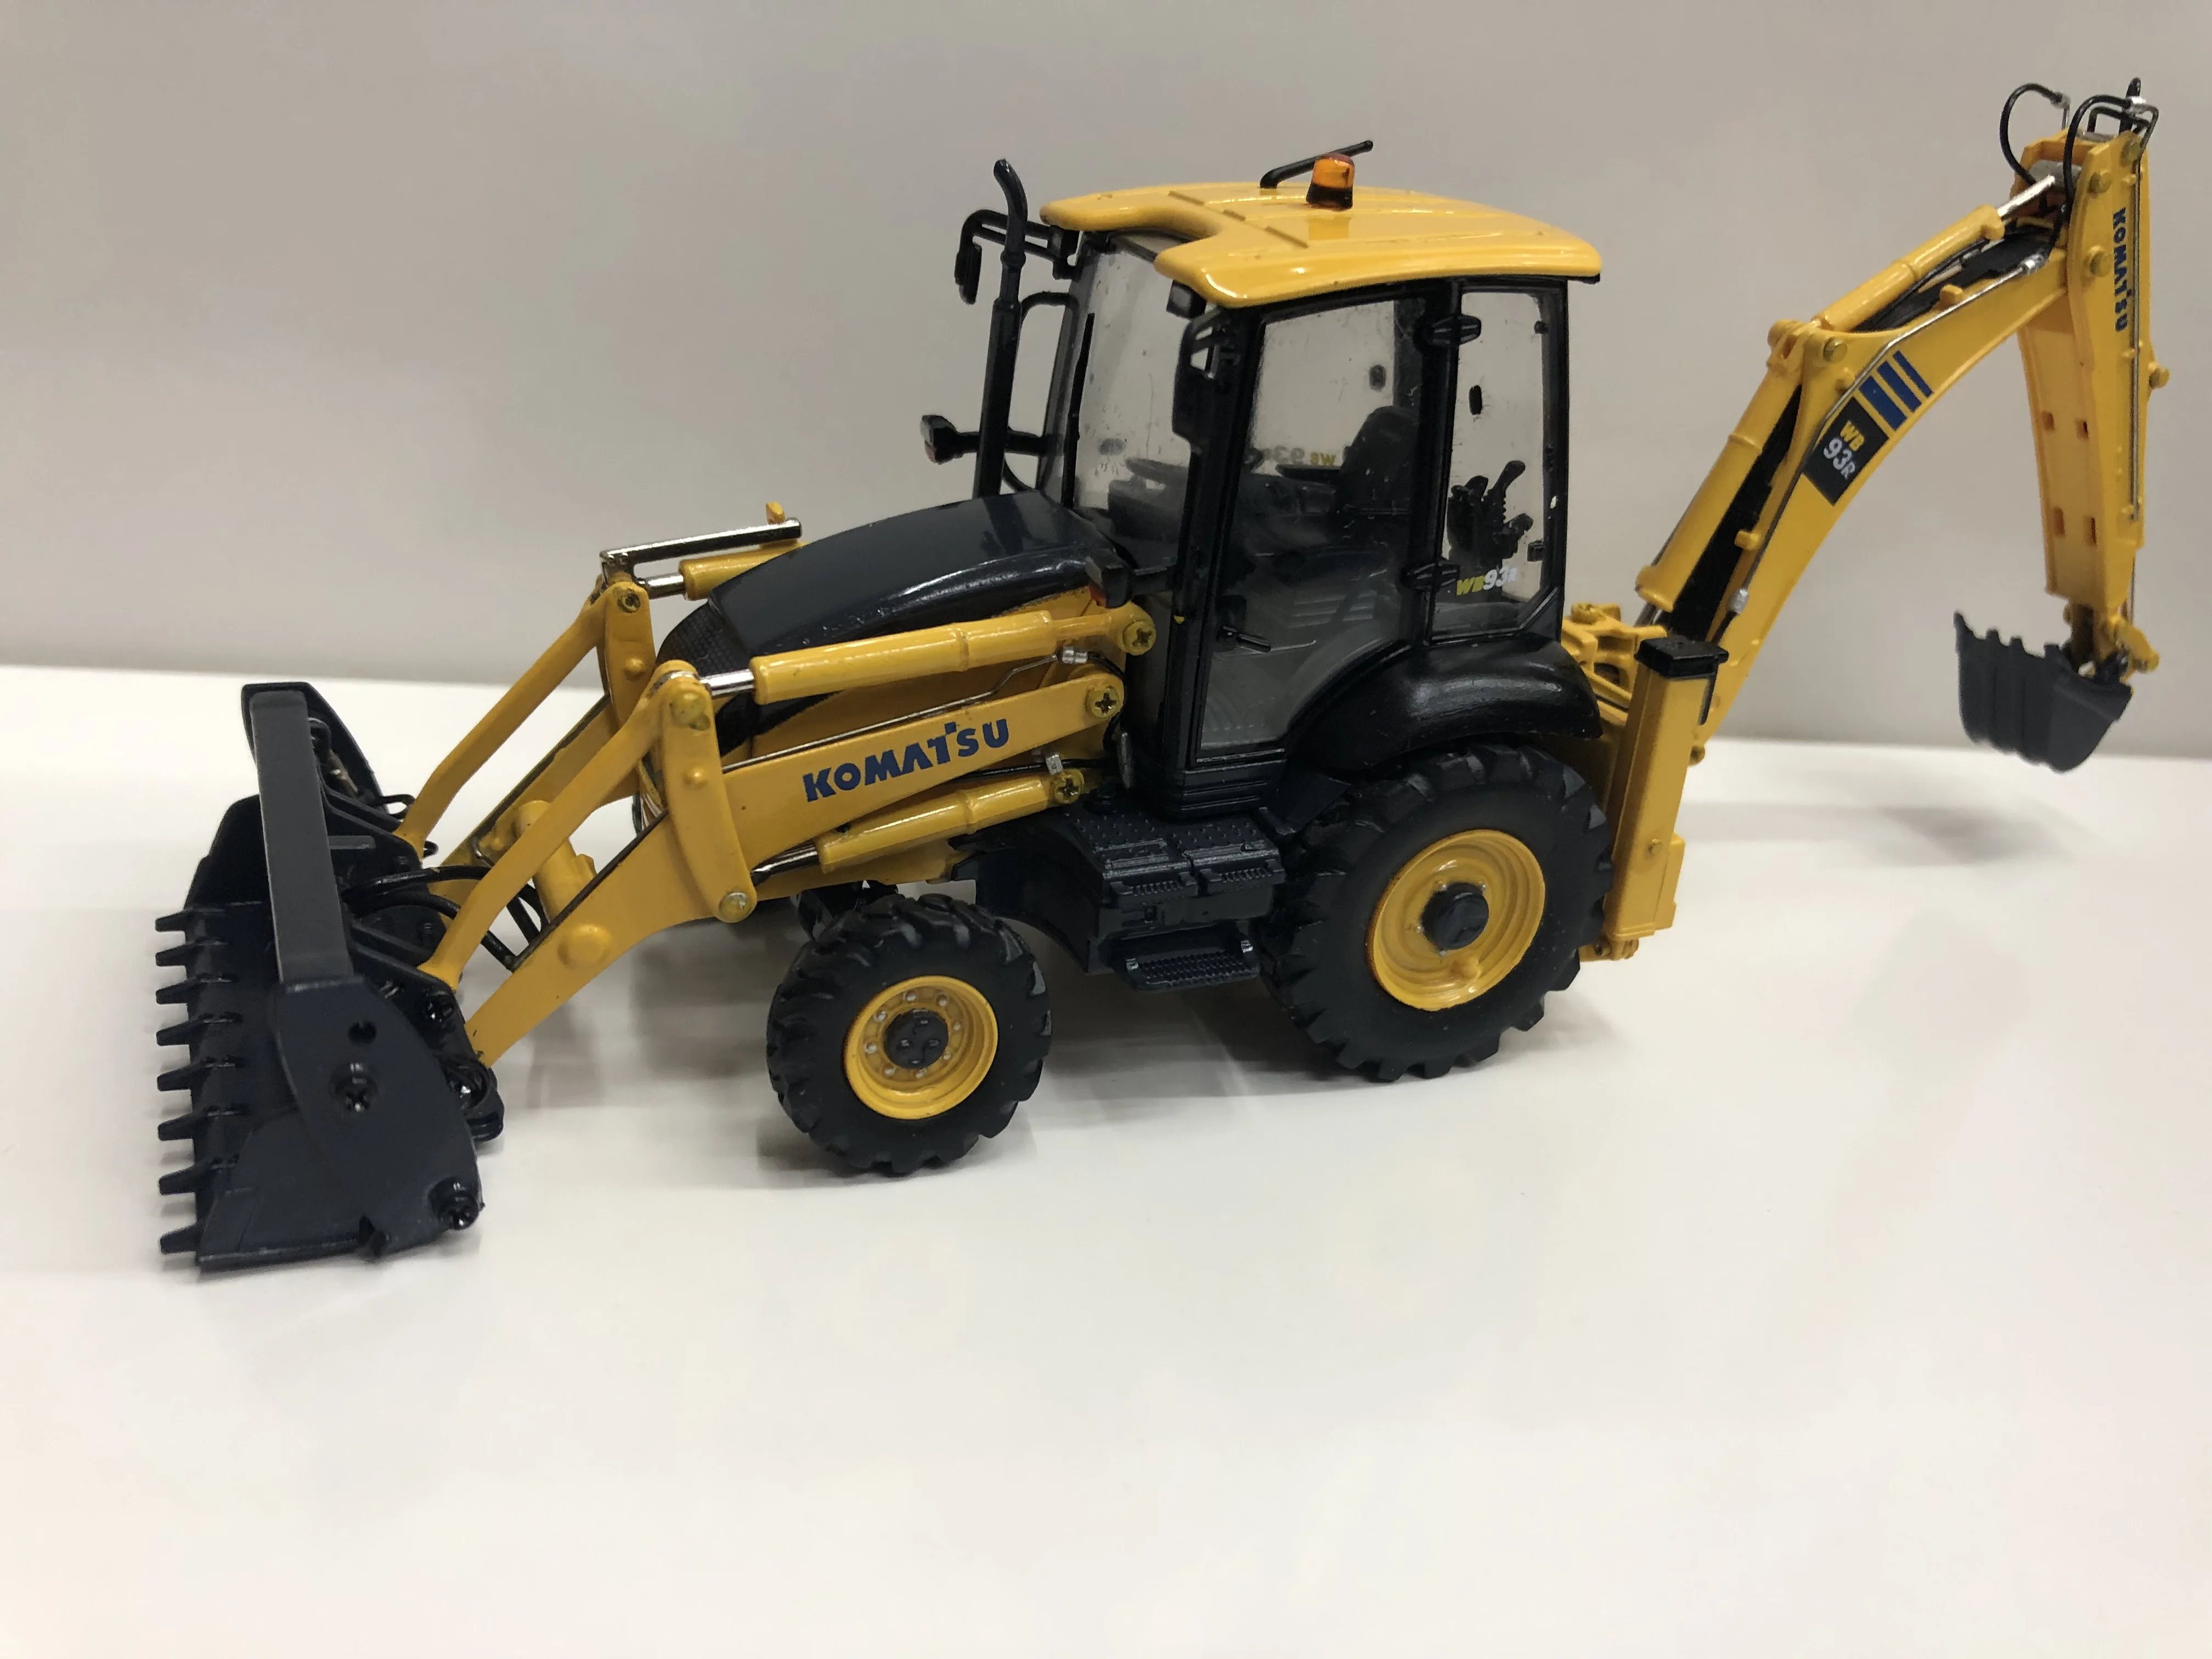 

Collectible Alloy Model 1:50 Scale Komatsu WB93R-8 Sliding Loader Excavator Construction Vehicles Diecast Toy Model UH8142